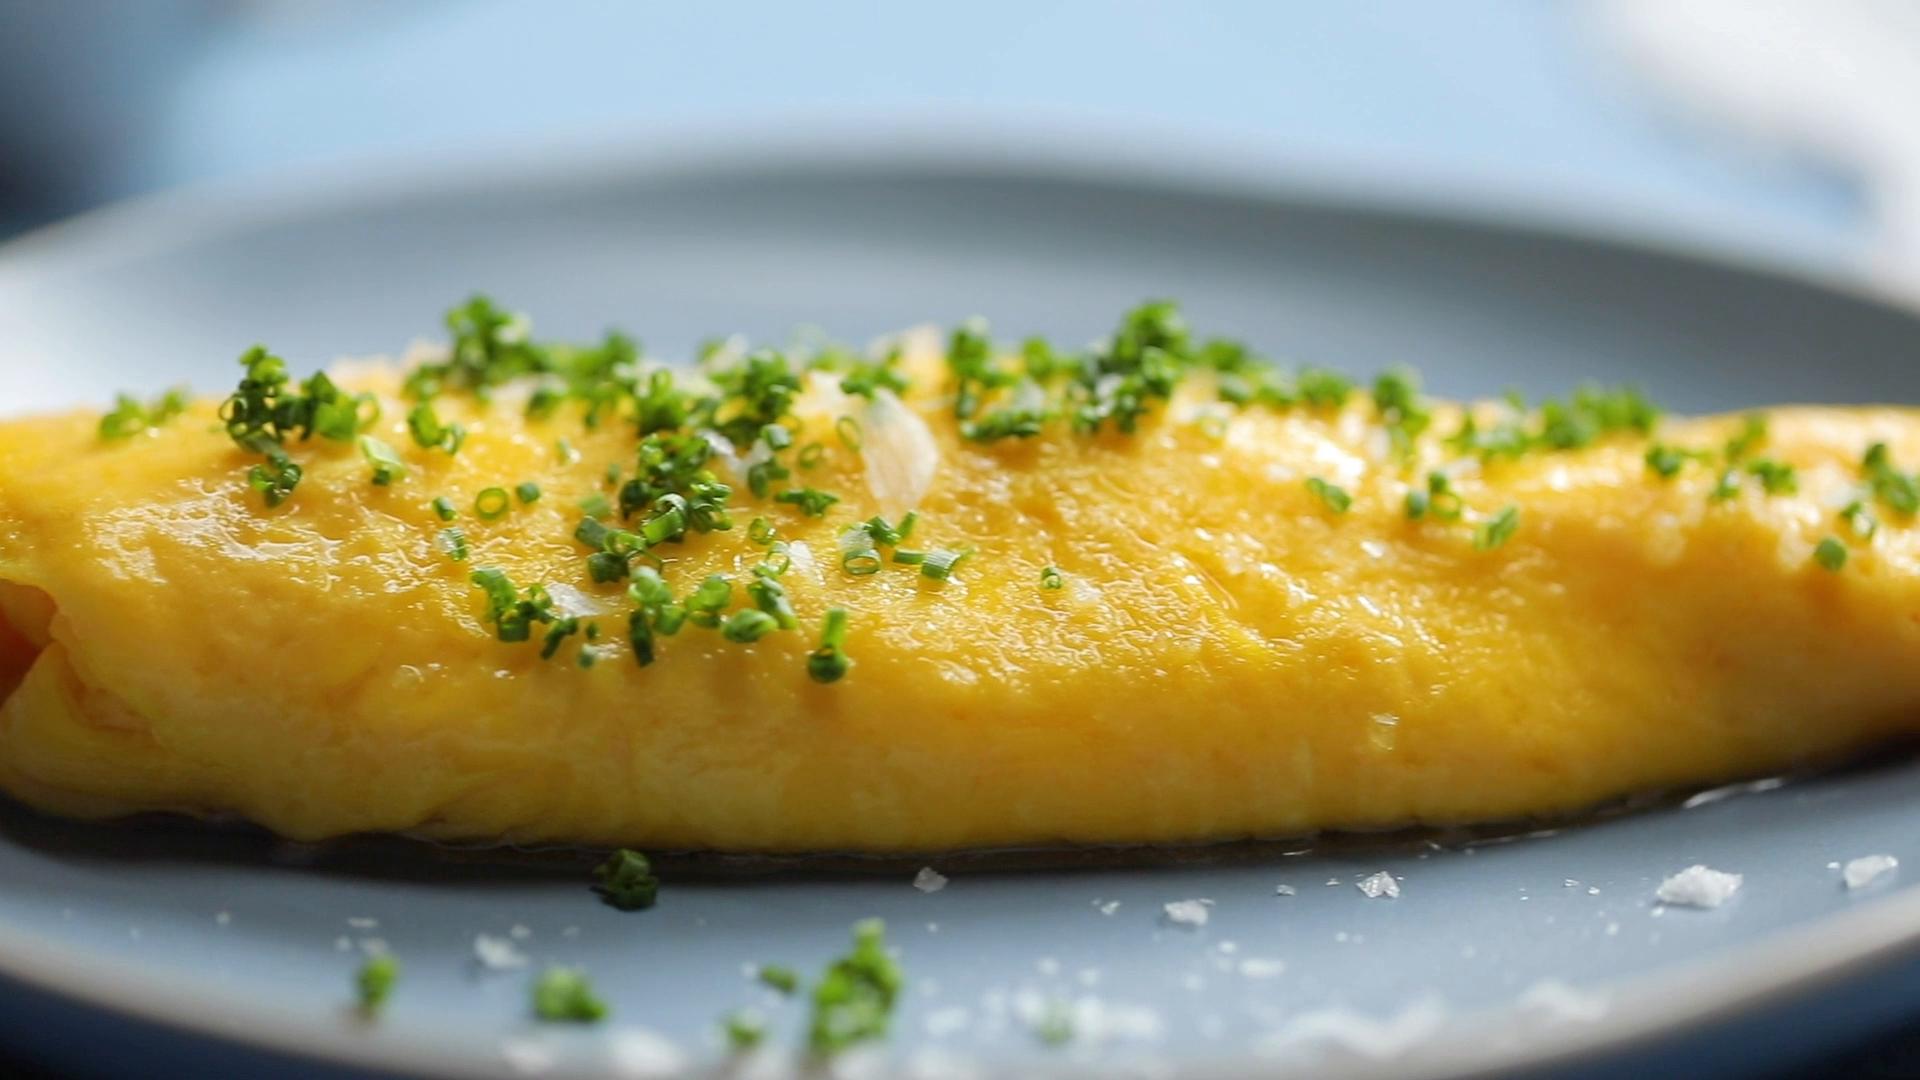 How To Make a French Omelette - Step-by-Step Recipe